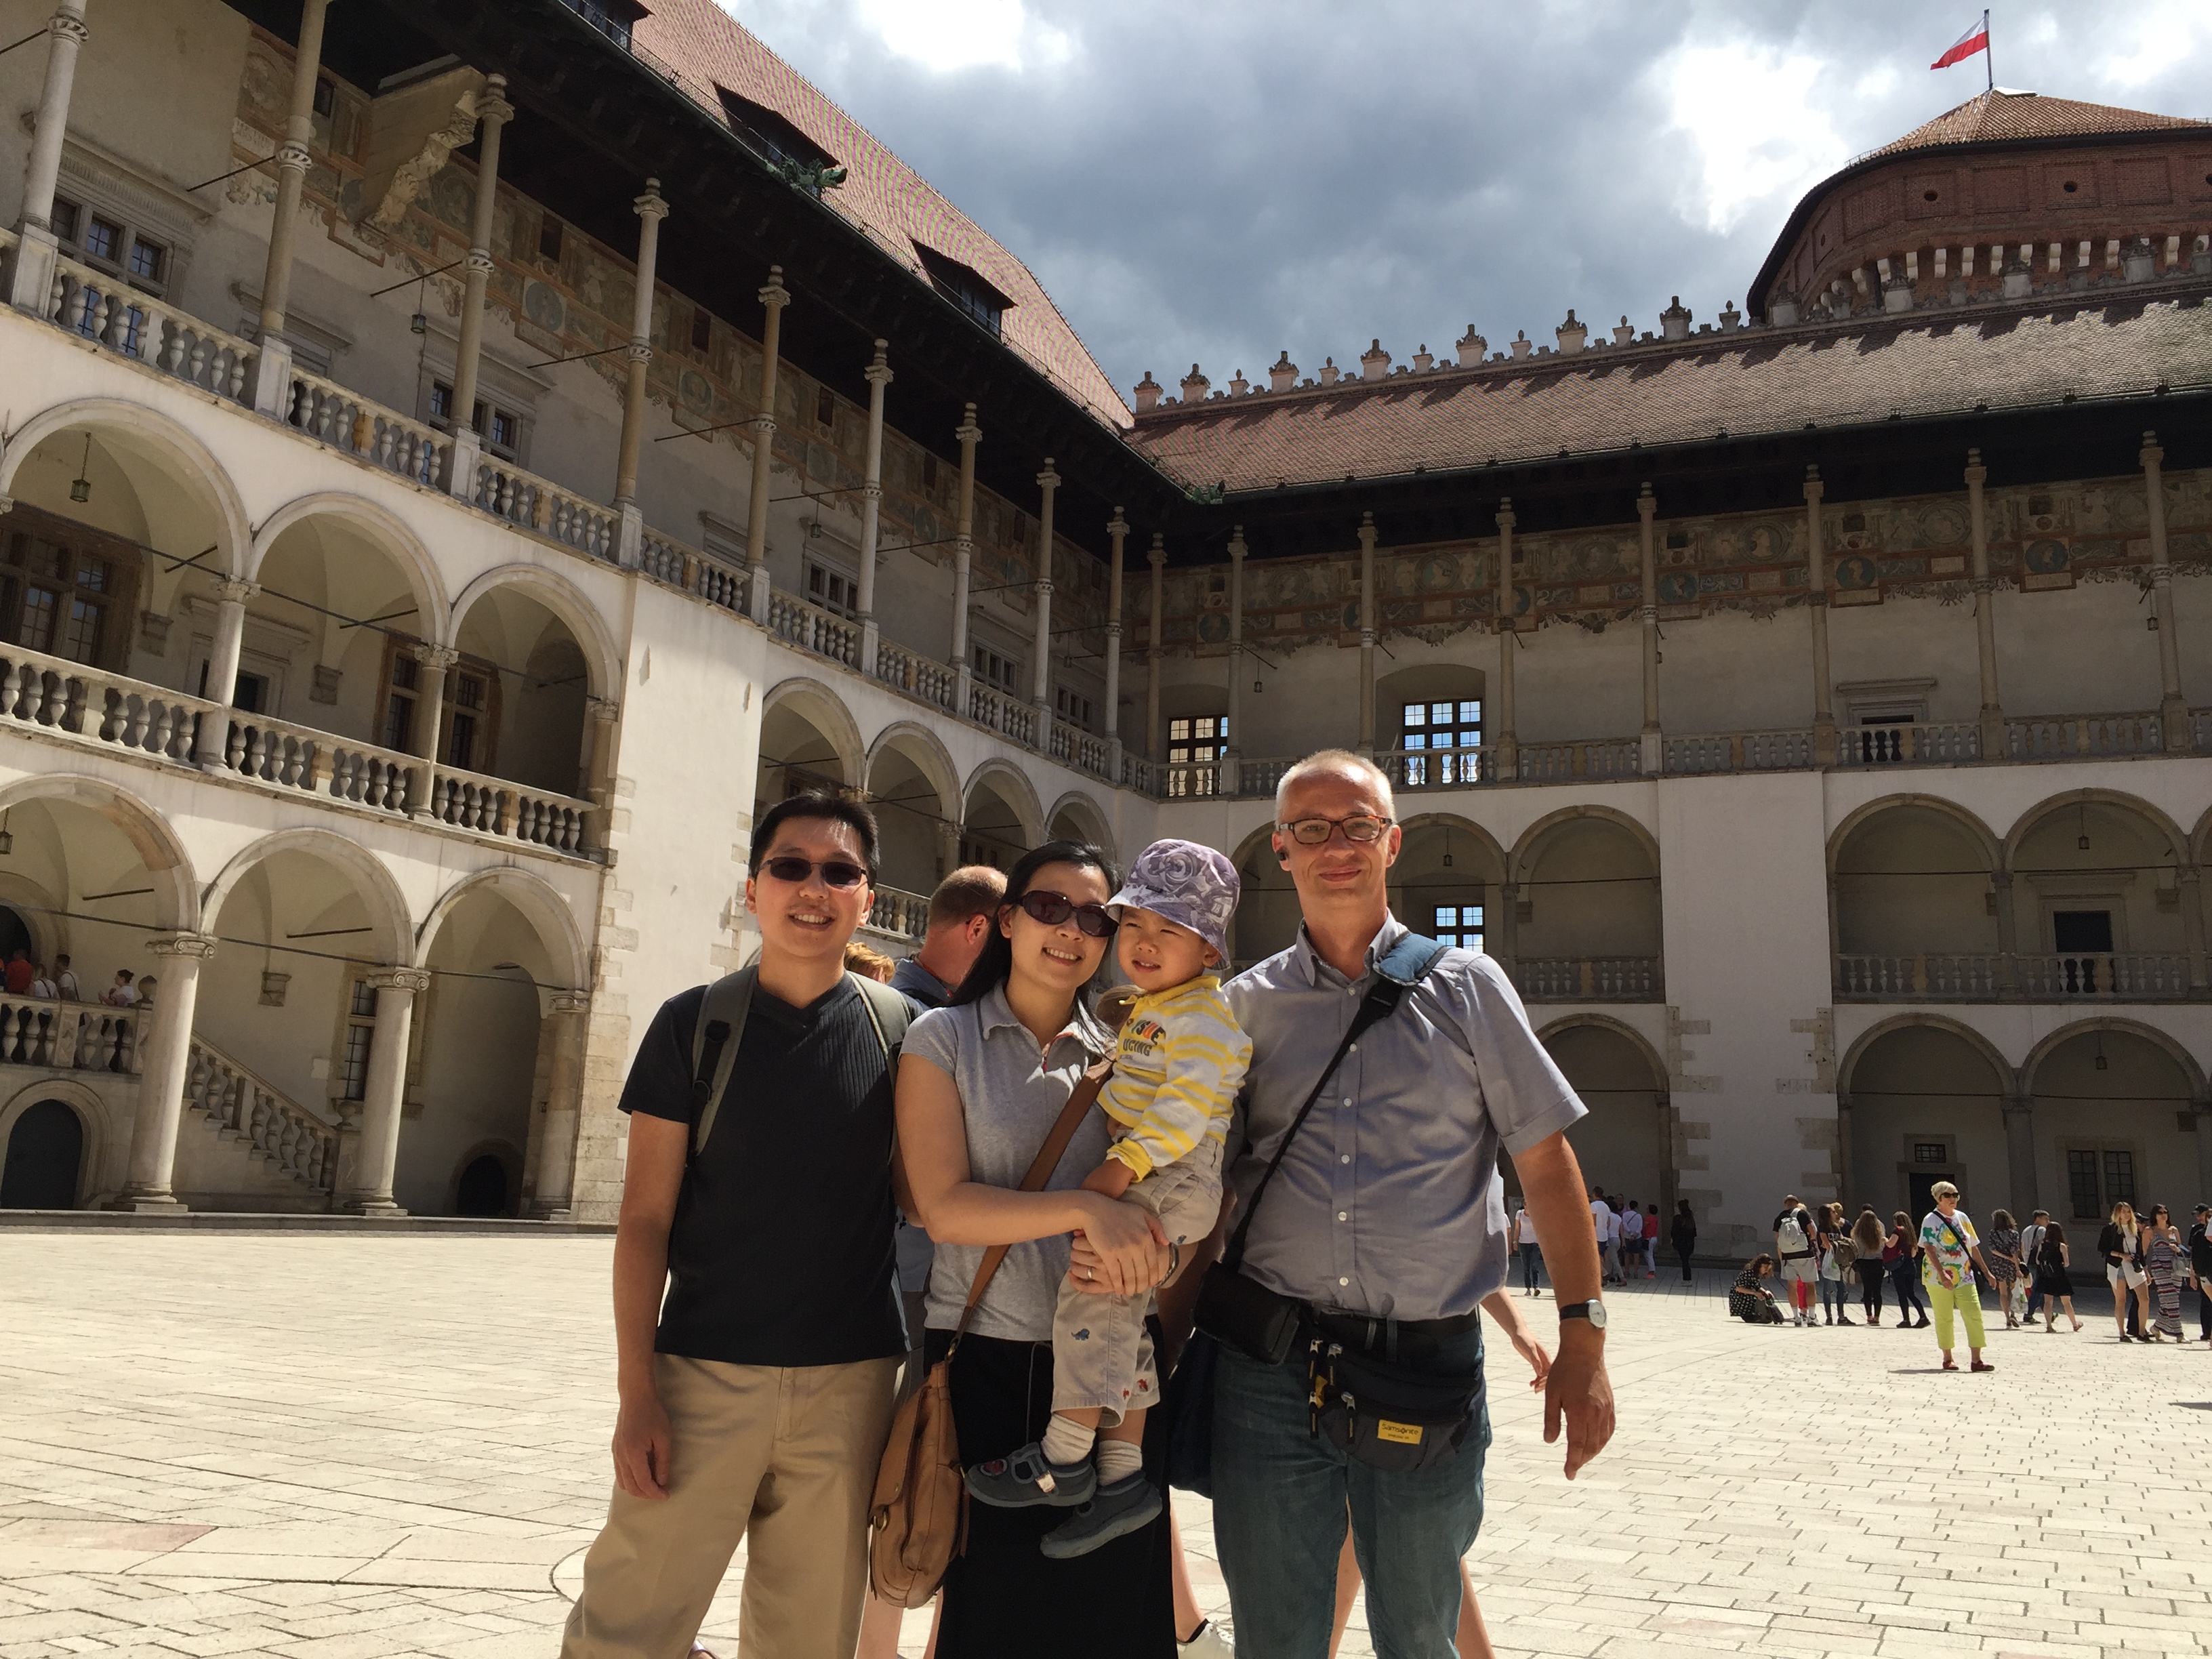 With my Guests from Australia in the courtyard of Wawel Royal Castle